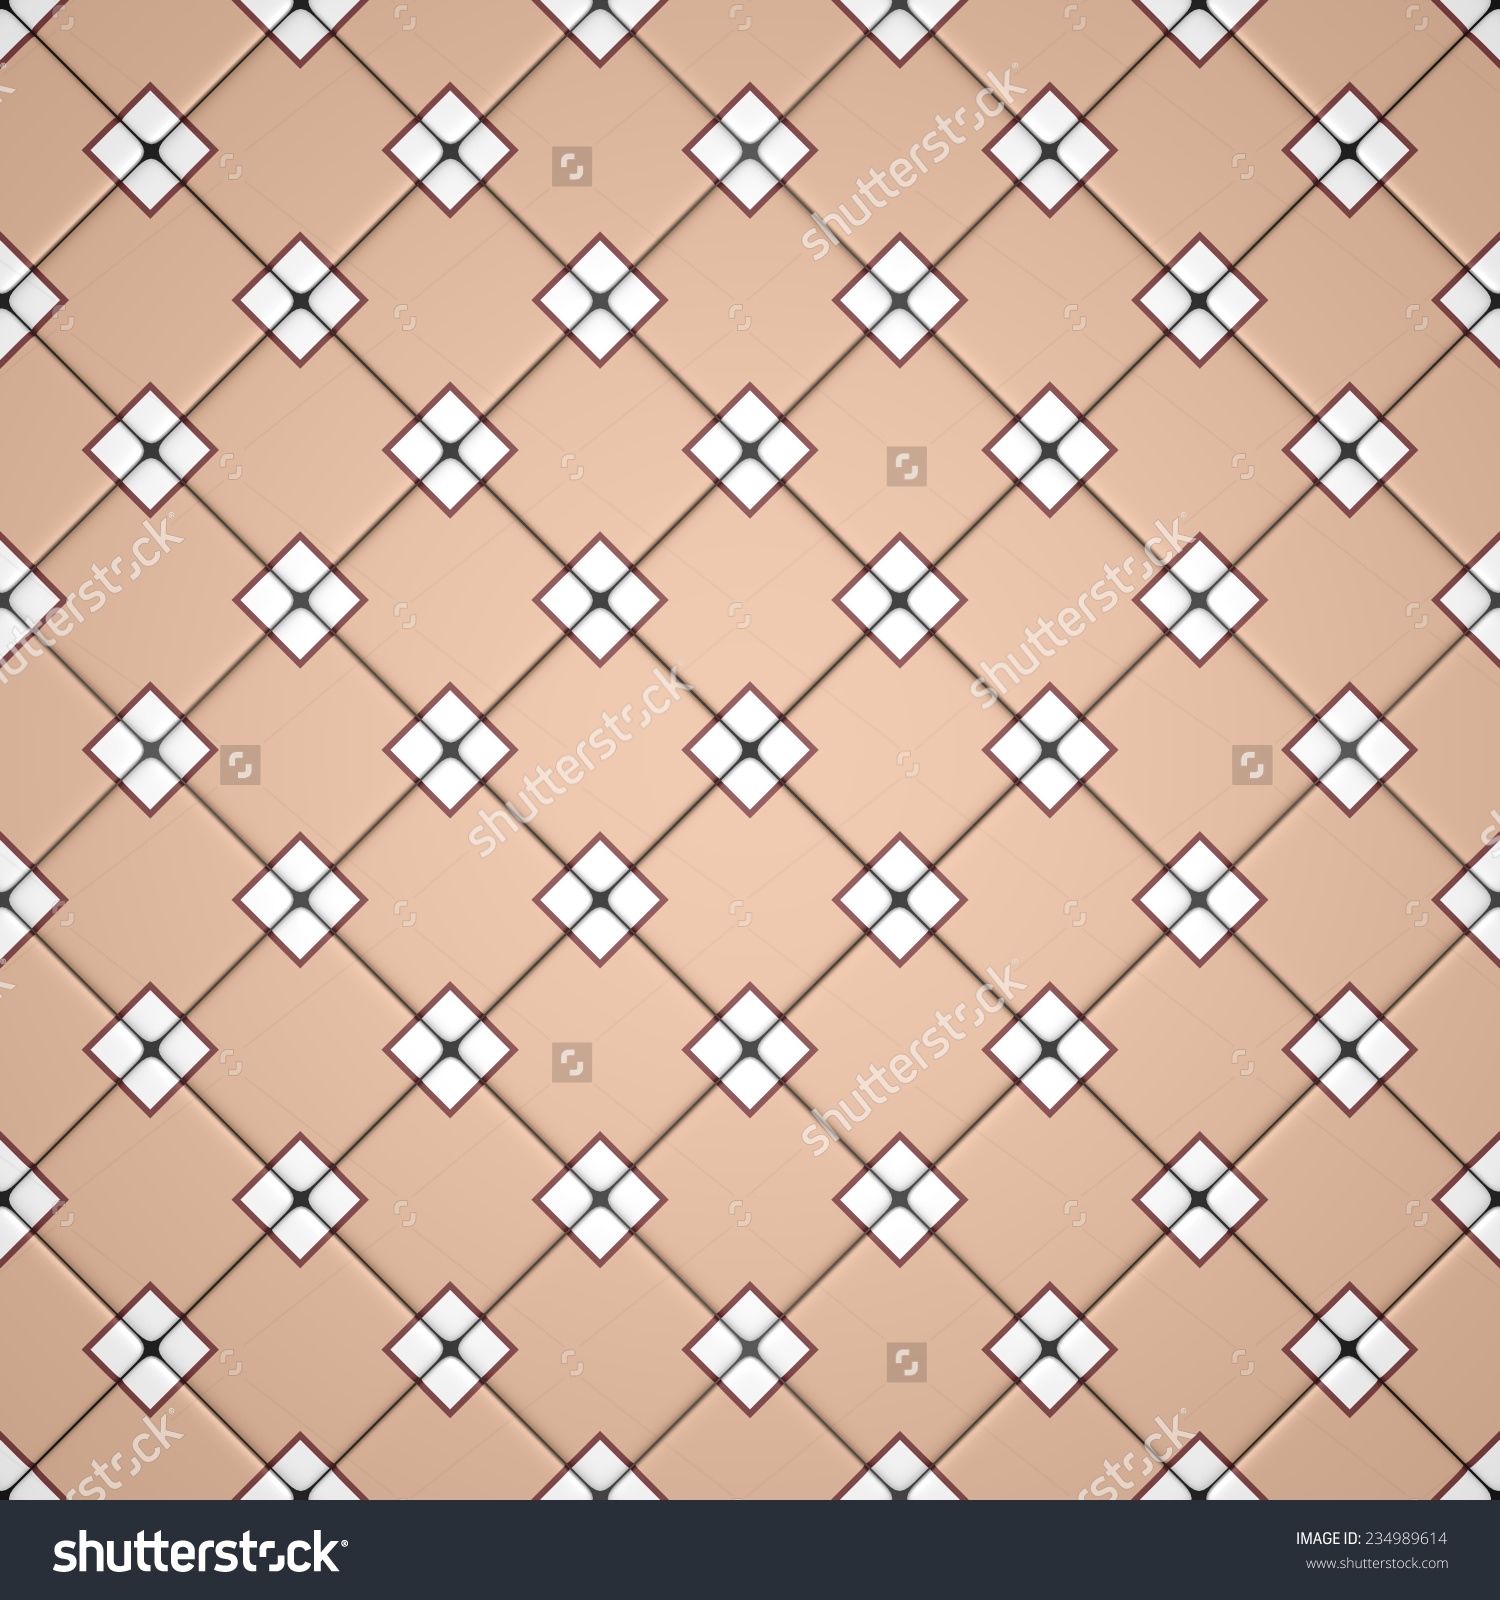 Brown And White Wallpaper Stock Photo Shutterstock